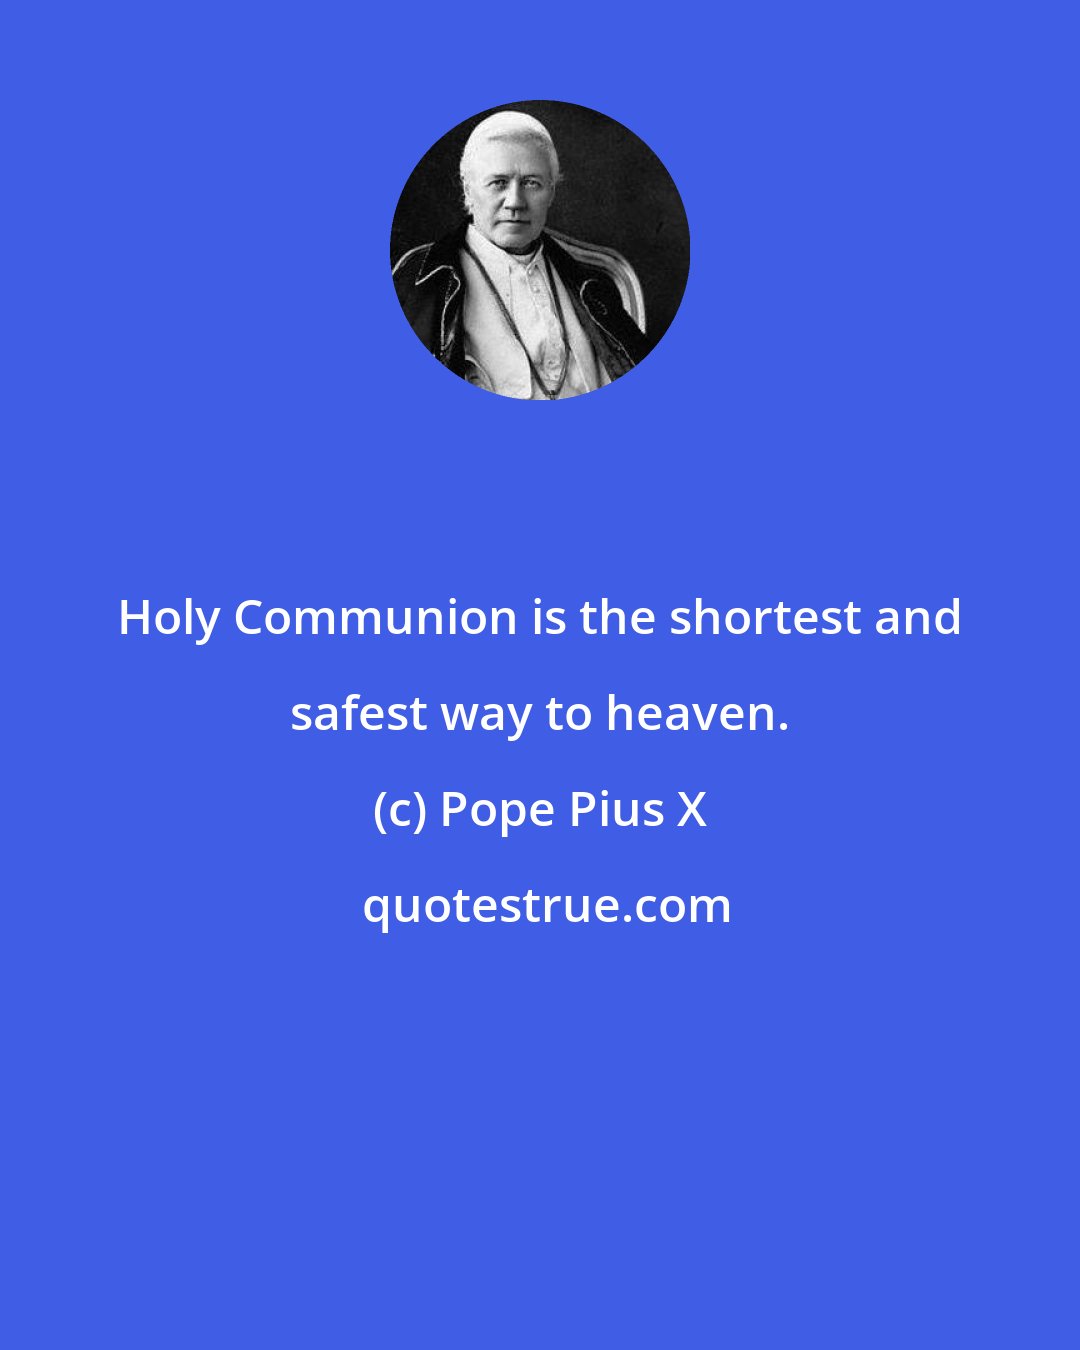 Pope Pius X: Holy Communion is the shortest and safest way to heaven.